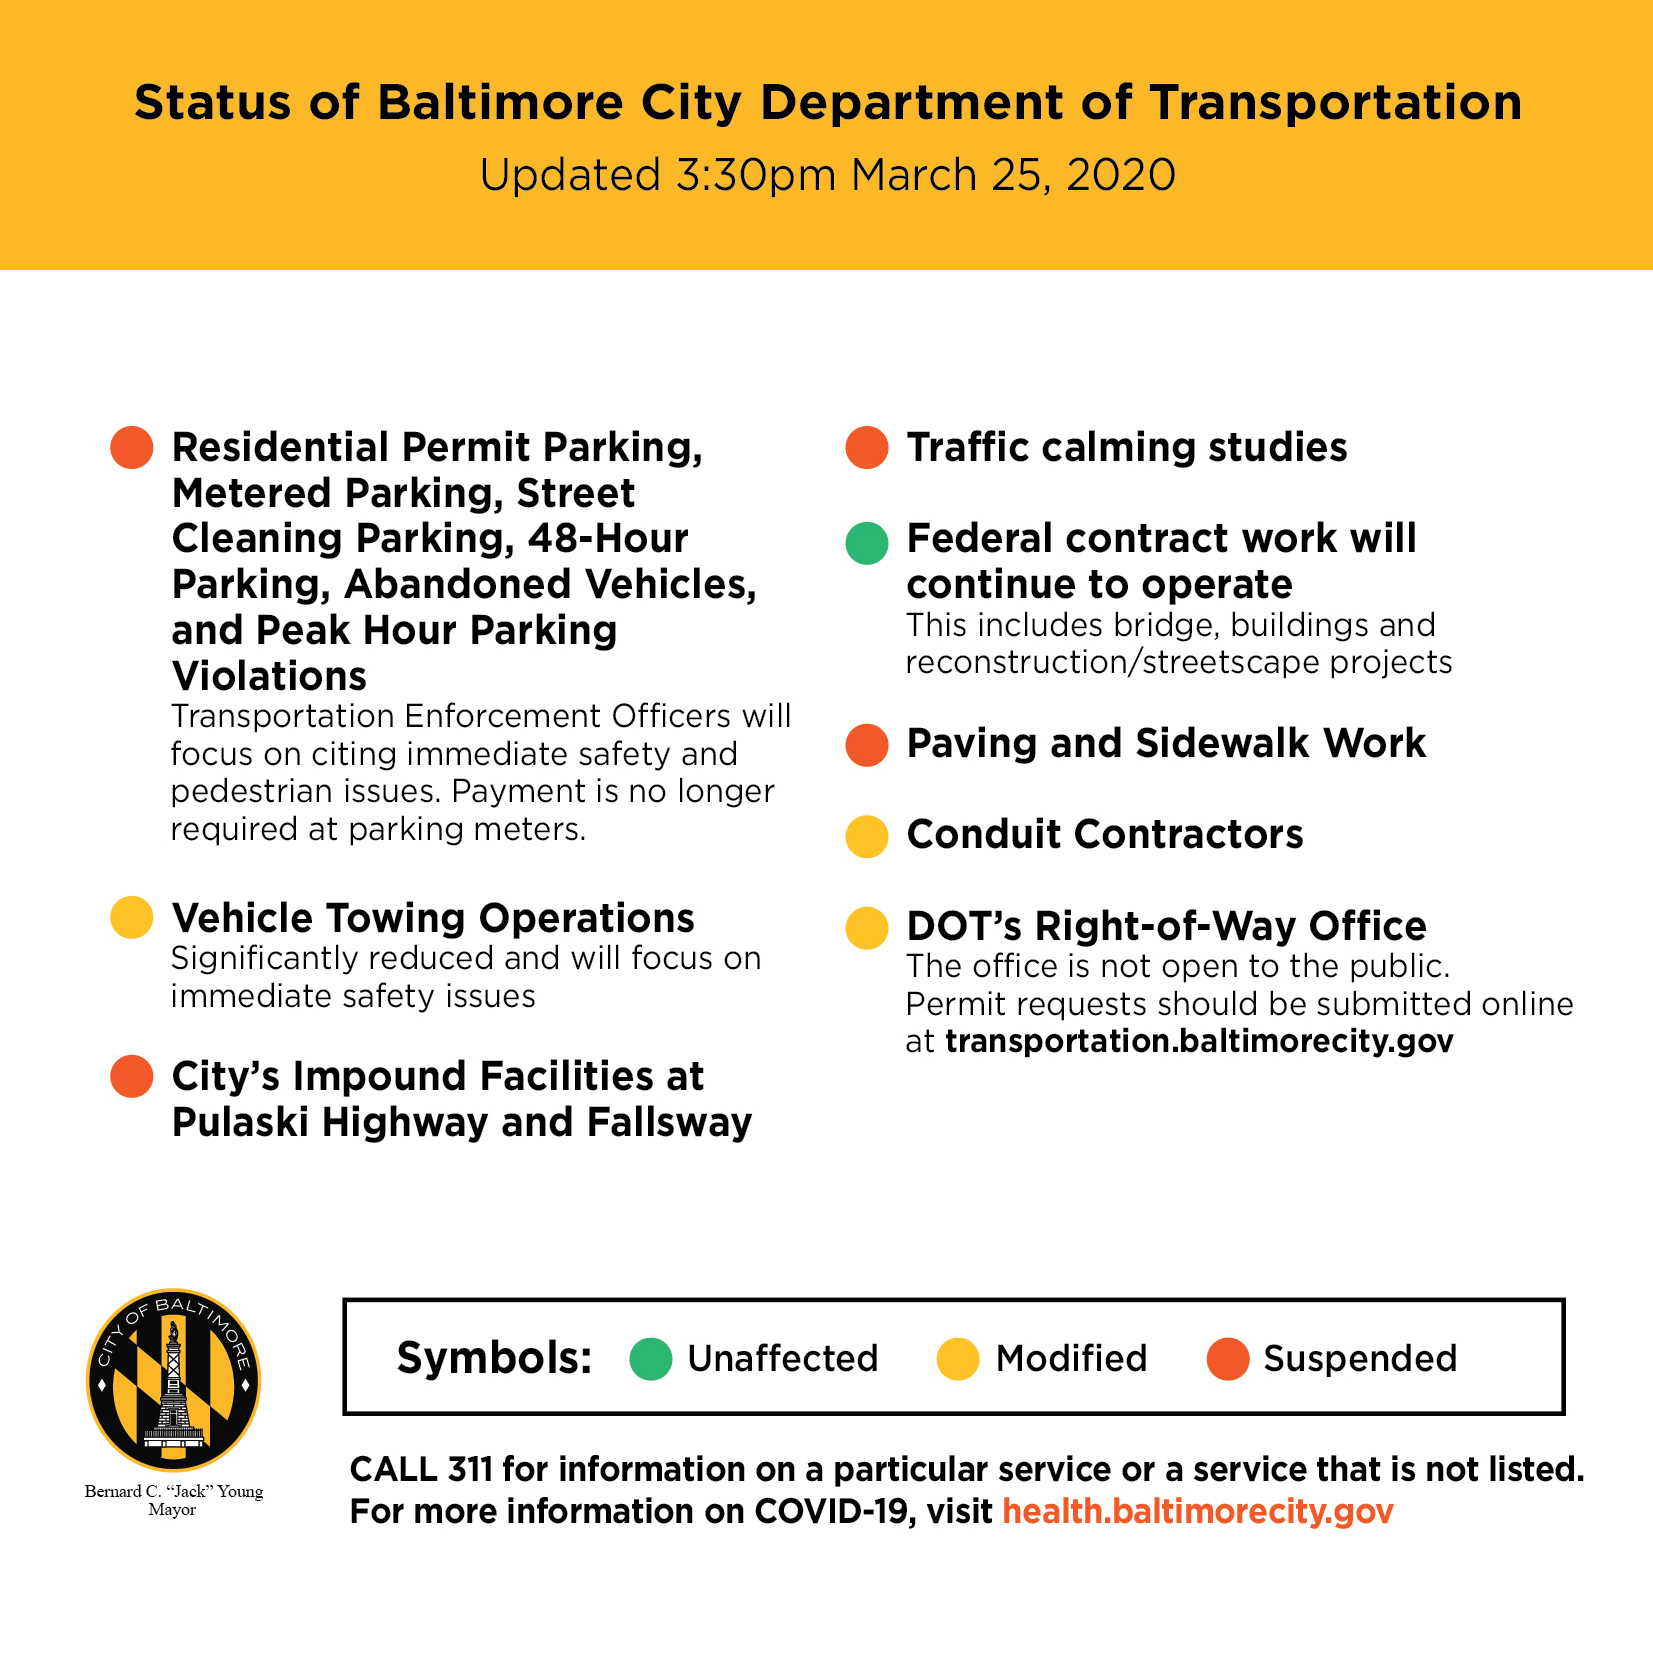 Status of Baltimore city services. For more information about current services, call 3-1-1.